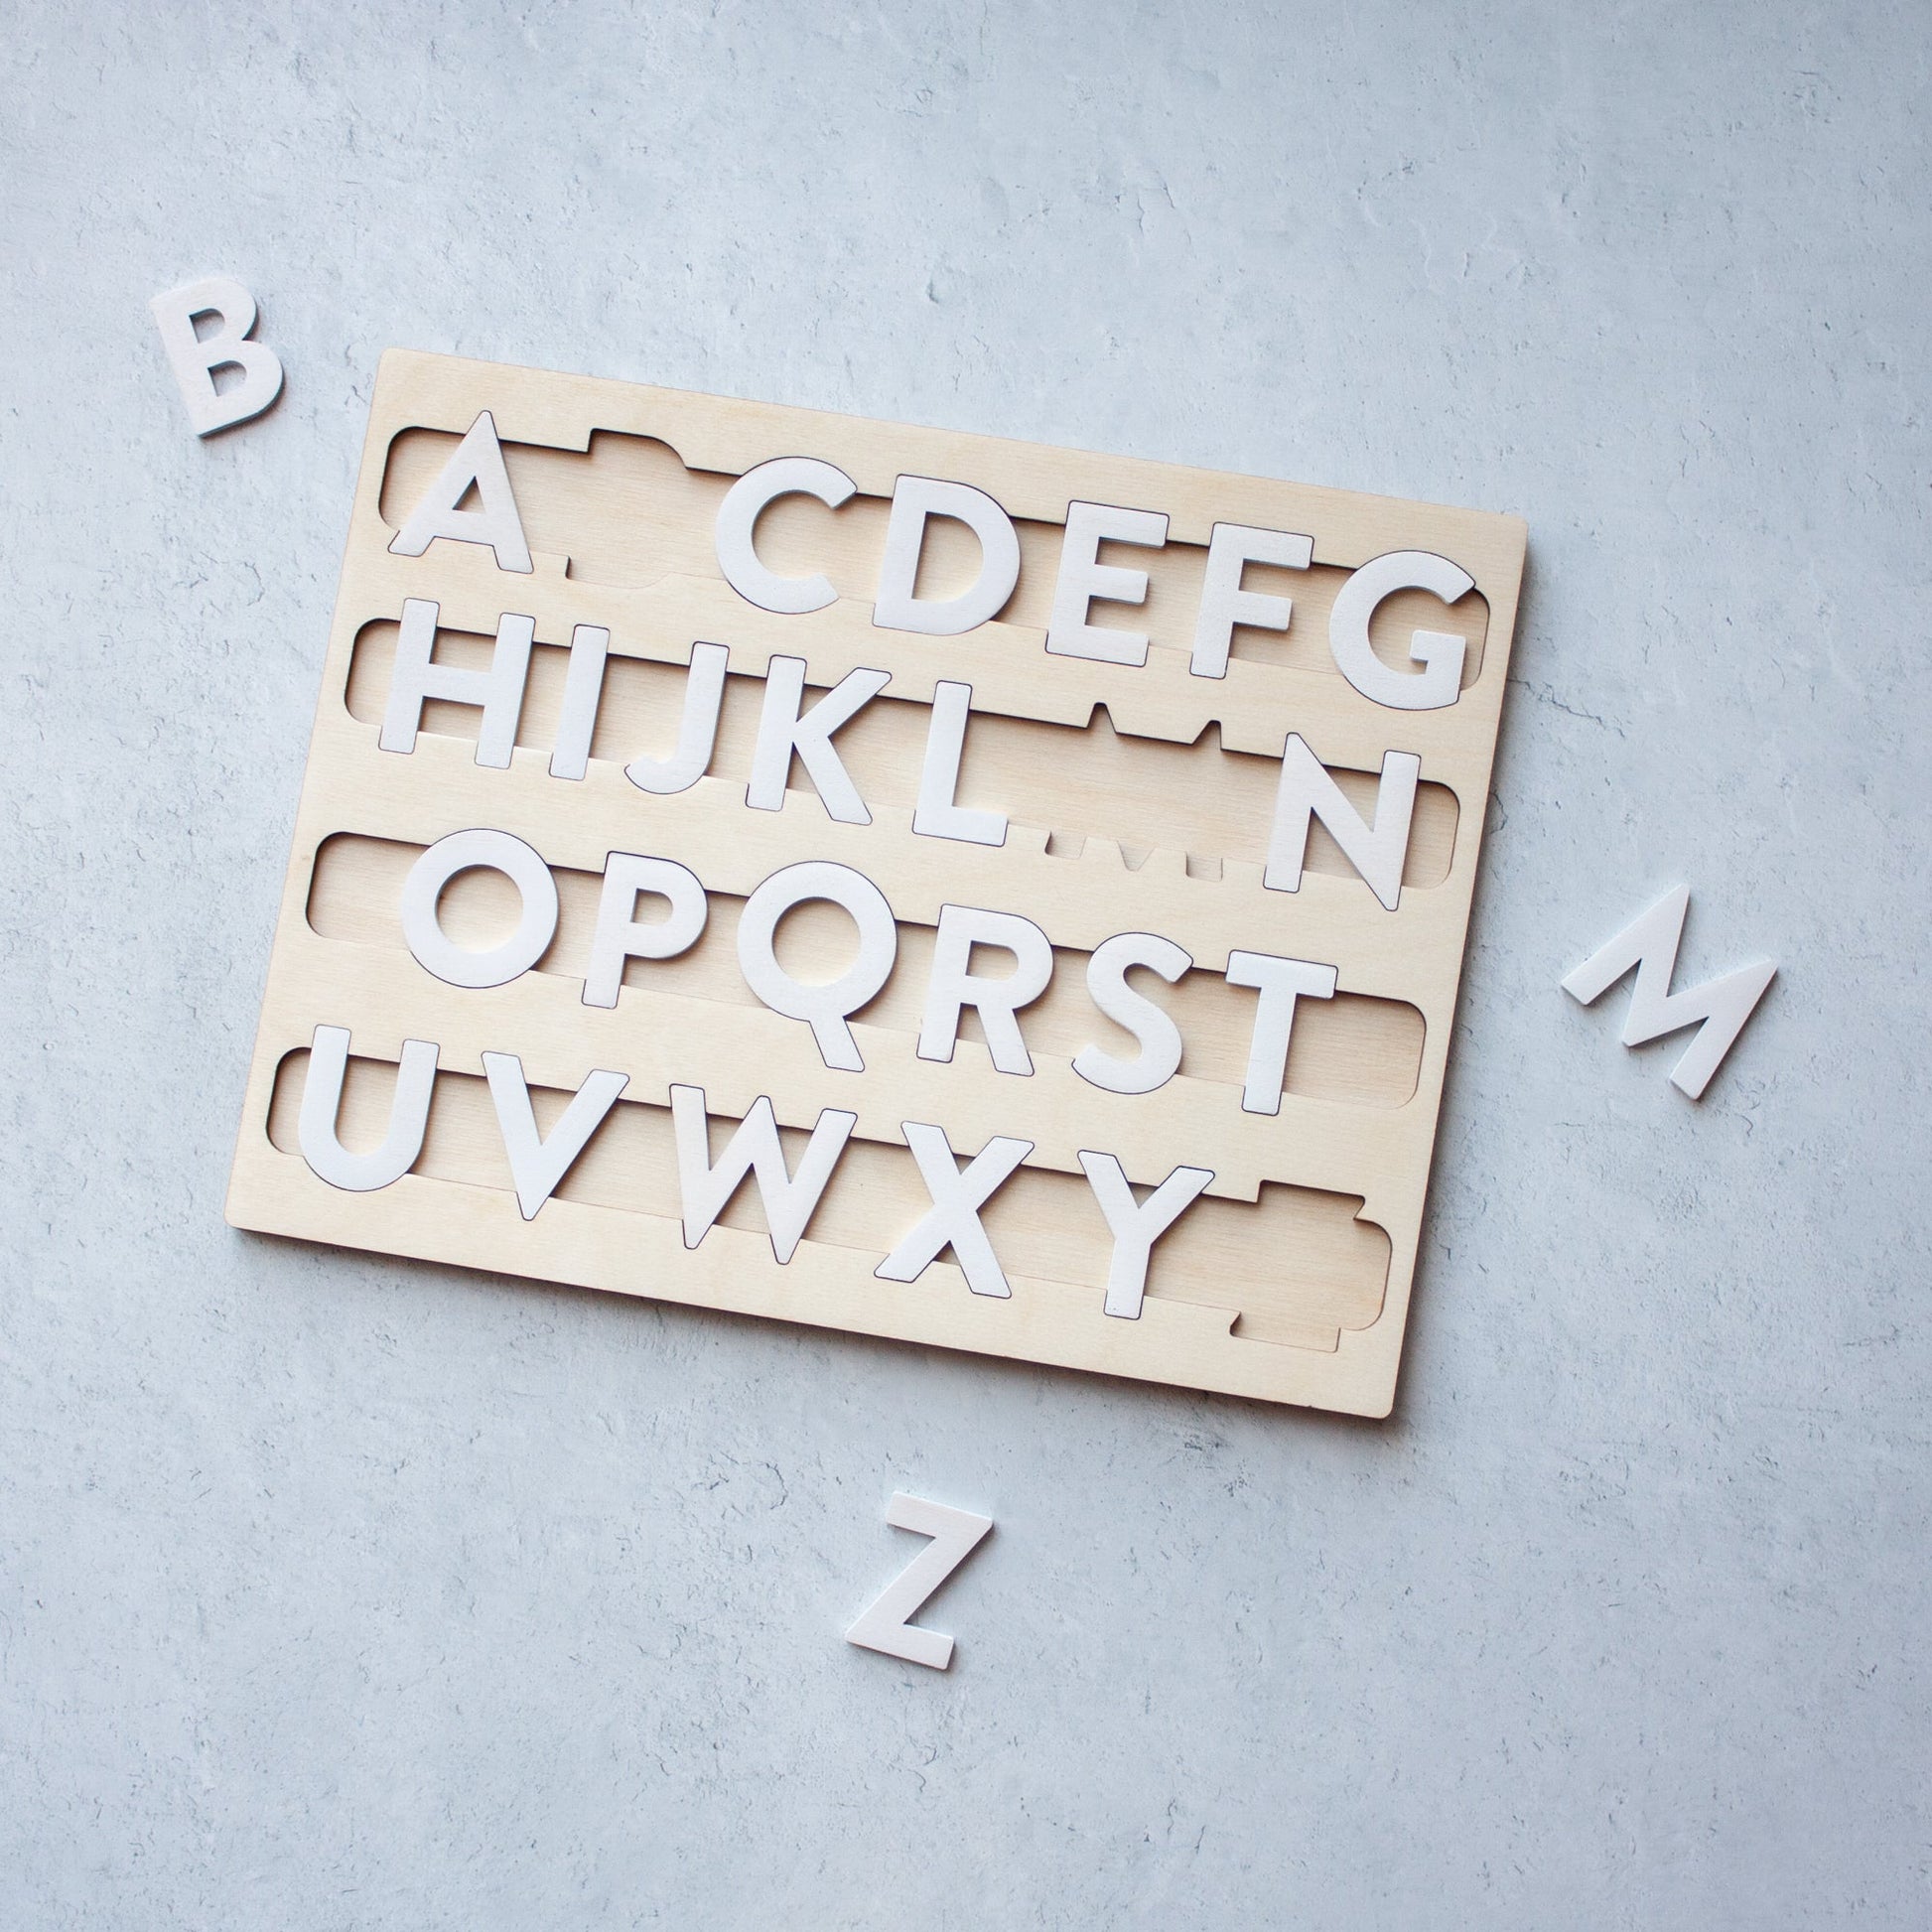 Alphabet Puzzle Learning Toy - laser cut alphabet jigsaw puzzle - by LeeMo Designs in Bend, Oregon